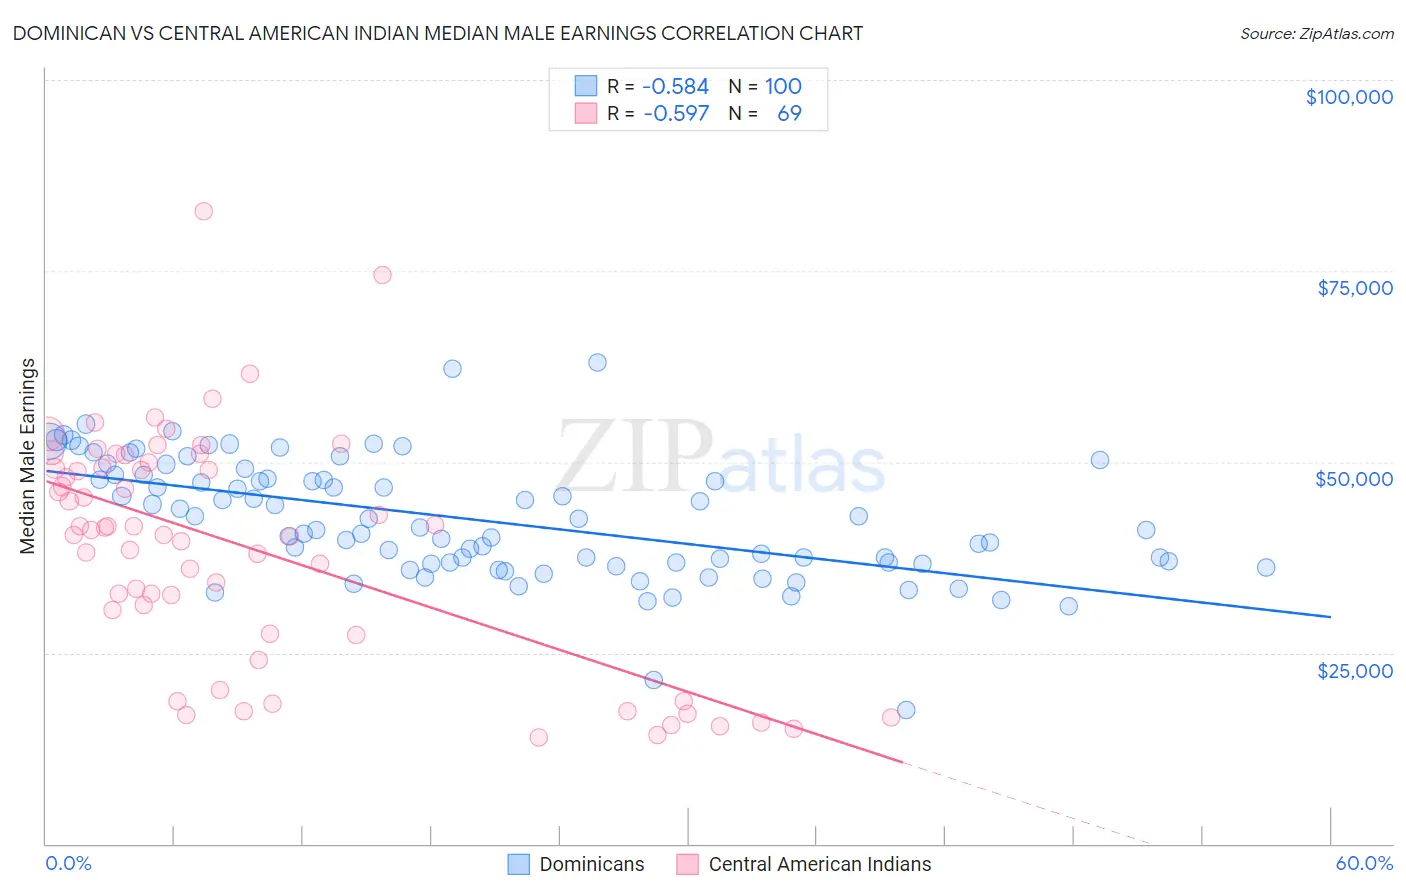 Dominican vs Central American Indian Median Male Earnings